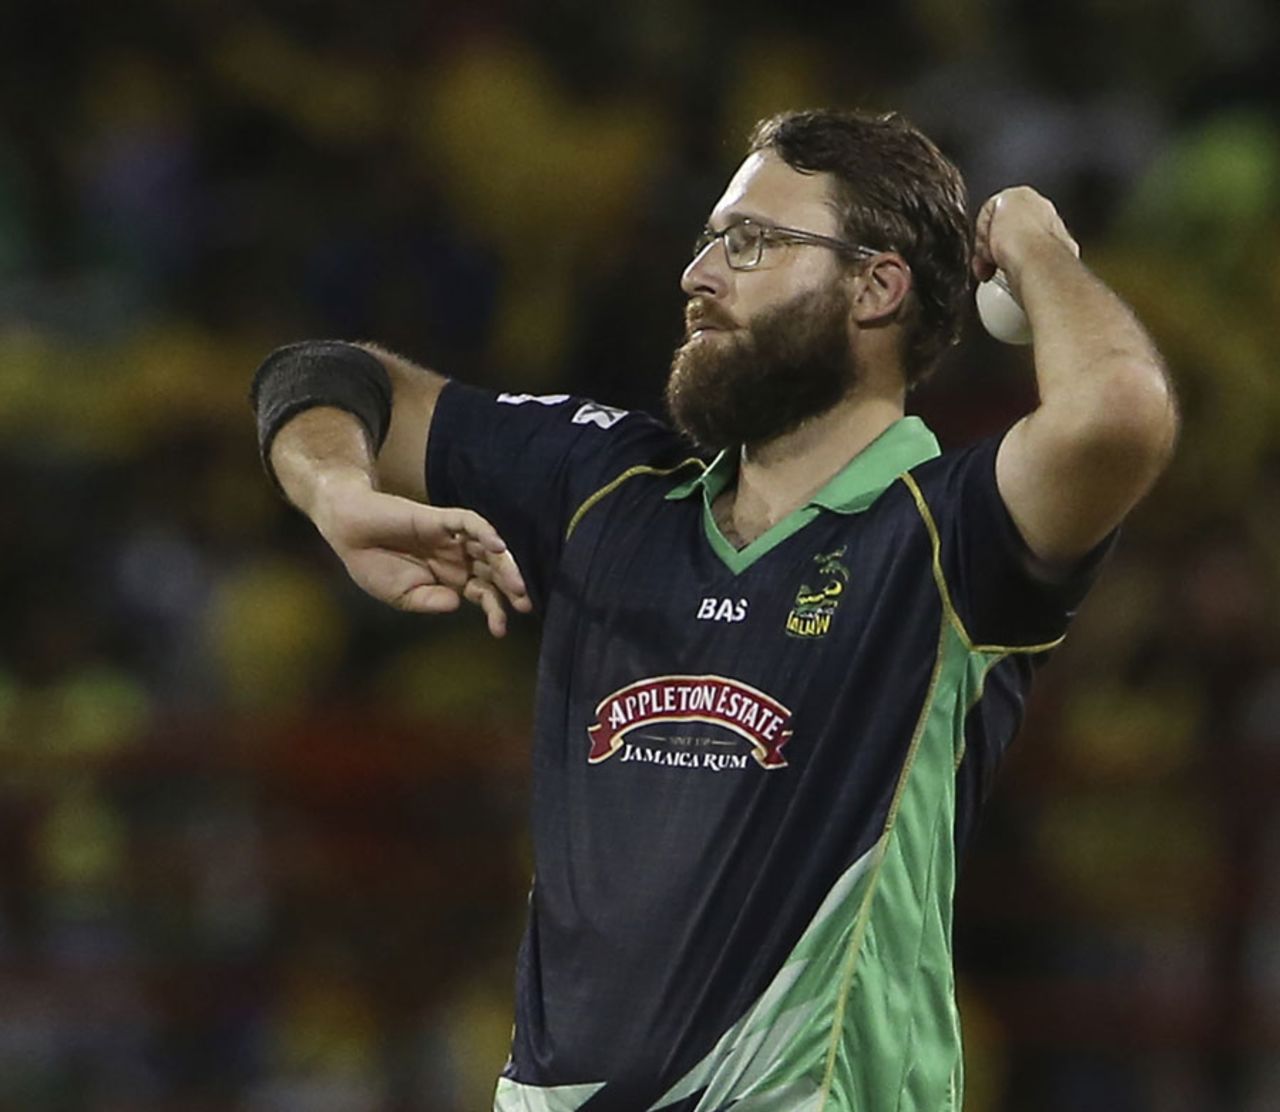 Daniel Vettori conceded 15 runs from his four overs, Guyana Amazon Warriors v Jamaica Tallawahs, CPL 2014, Providence, July 20, 2014